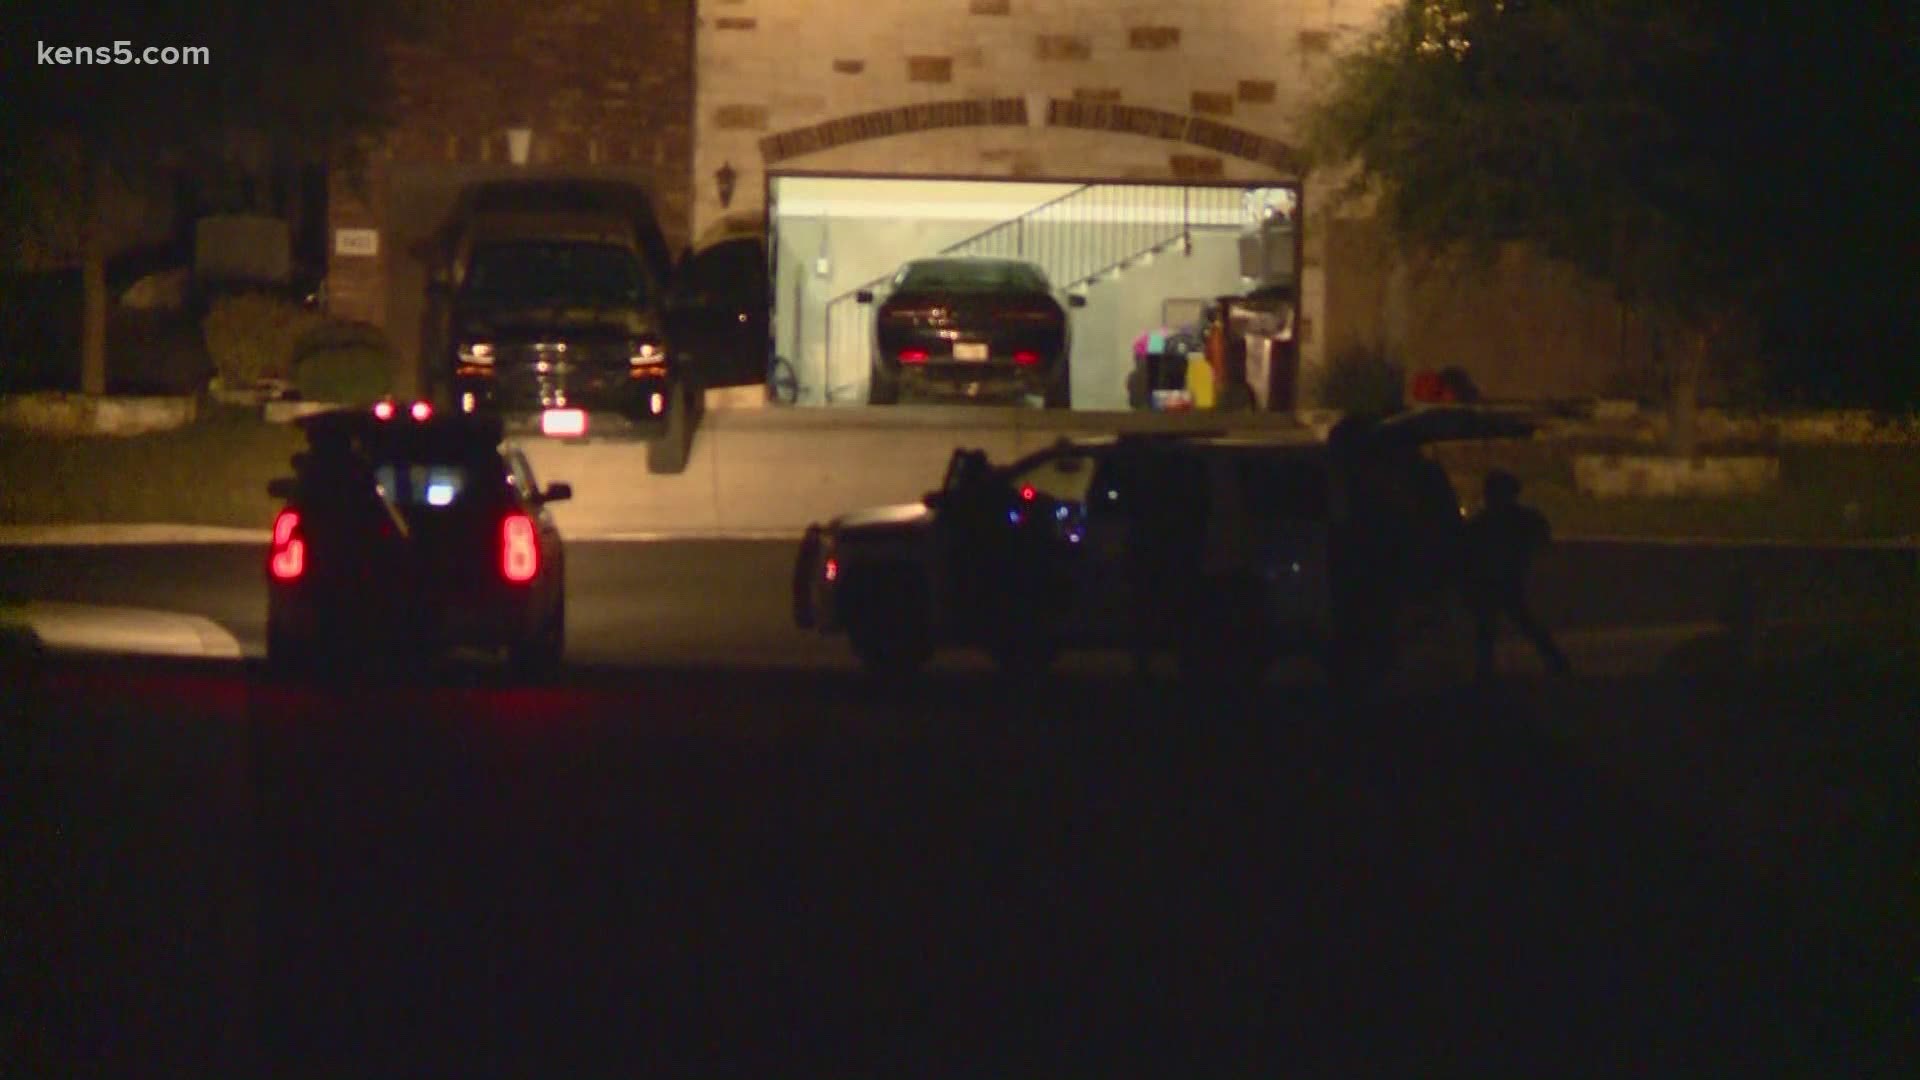 The suspect allegedly shot a woman inside a San Antonio home several times during a domestic argument.